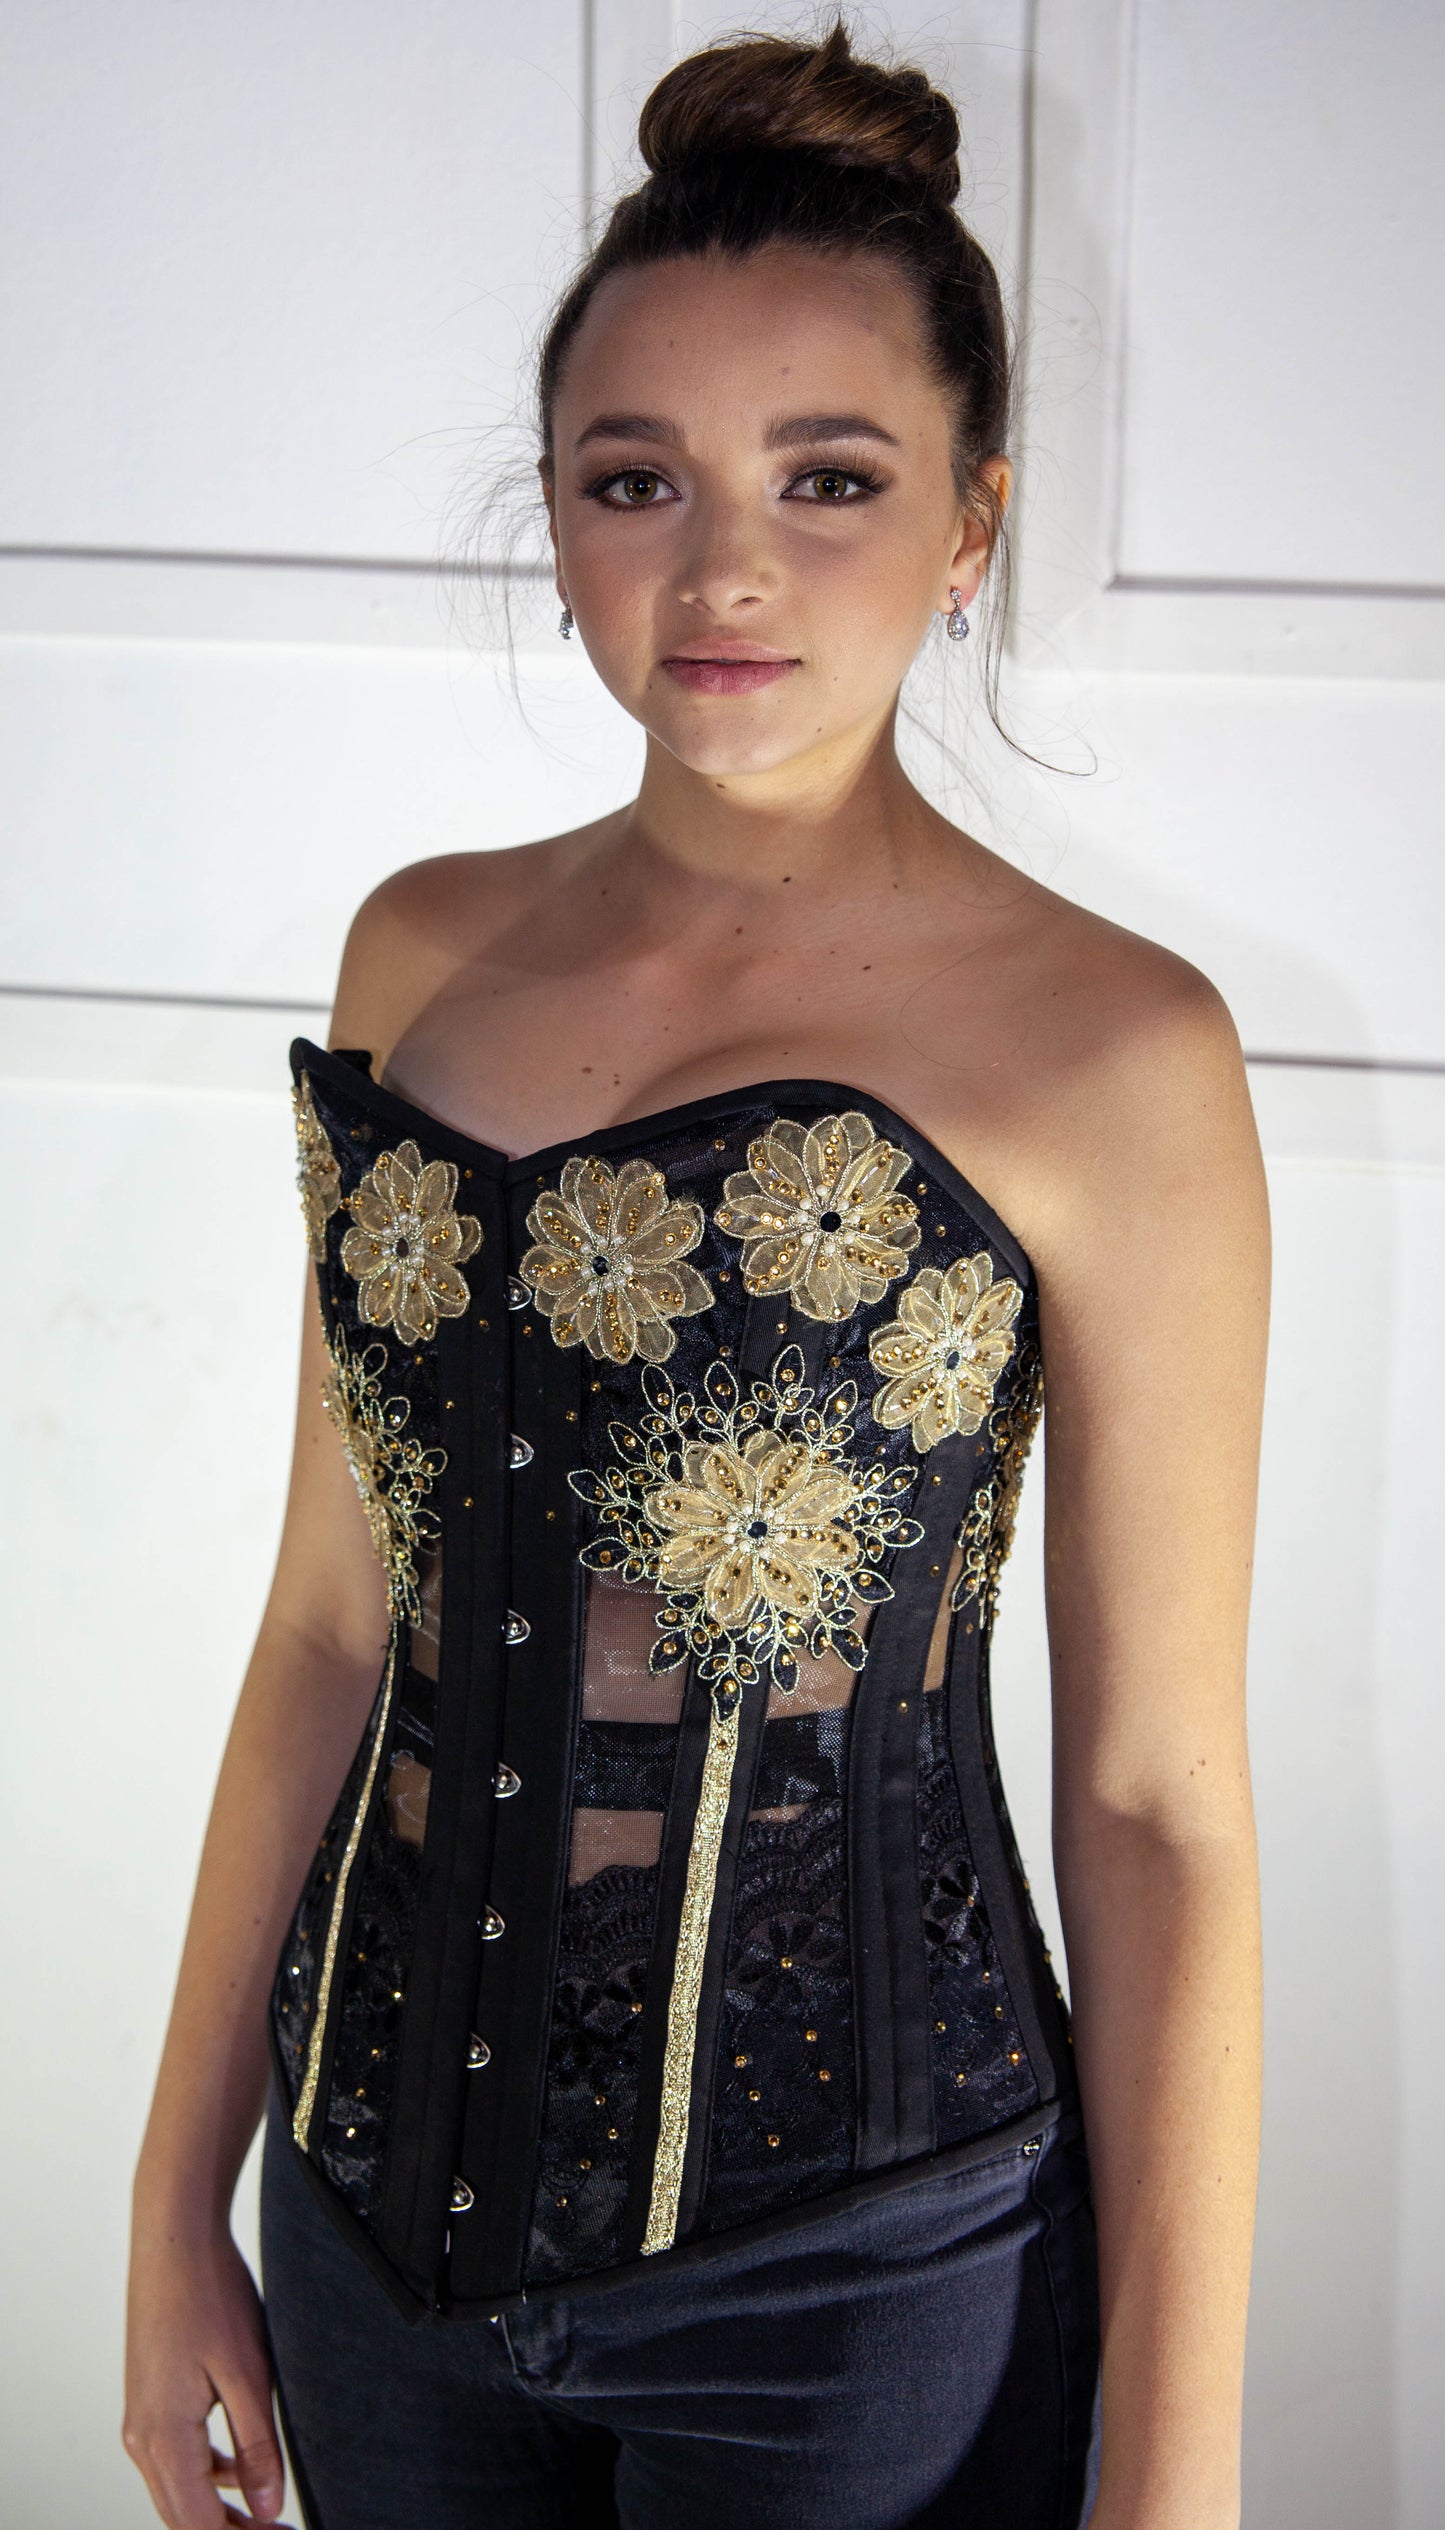 Corset - Black Nylon with Gold Flowers (by Heidi Couture)